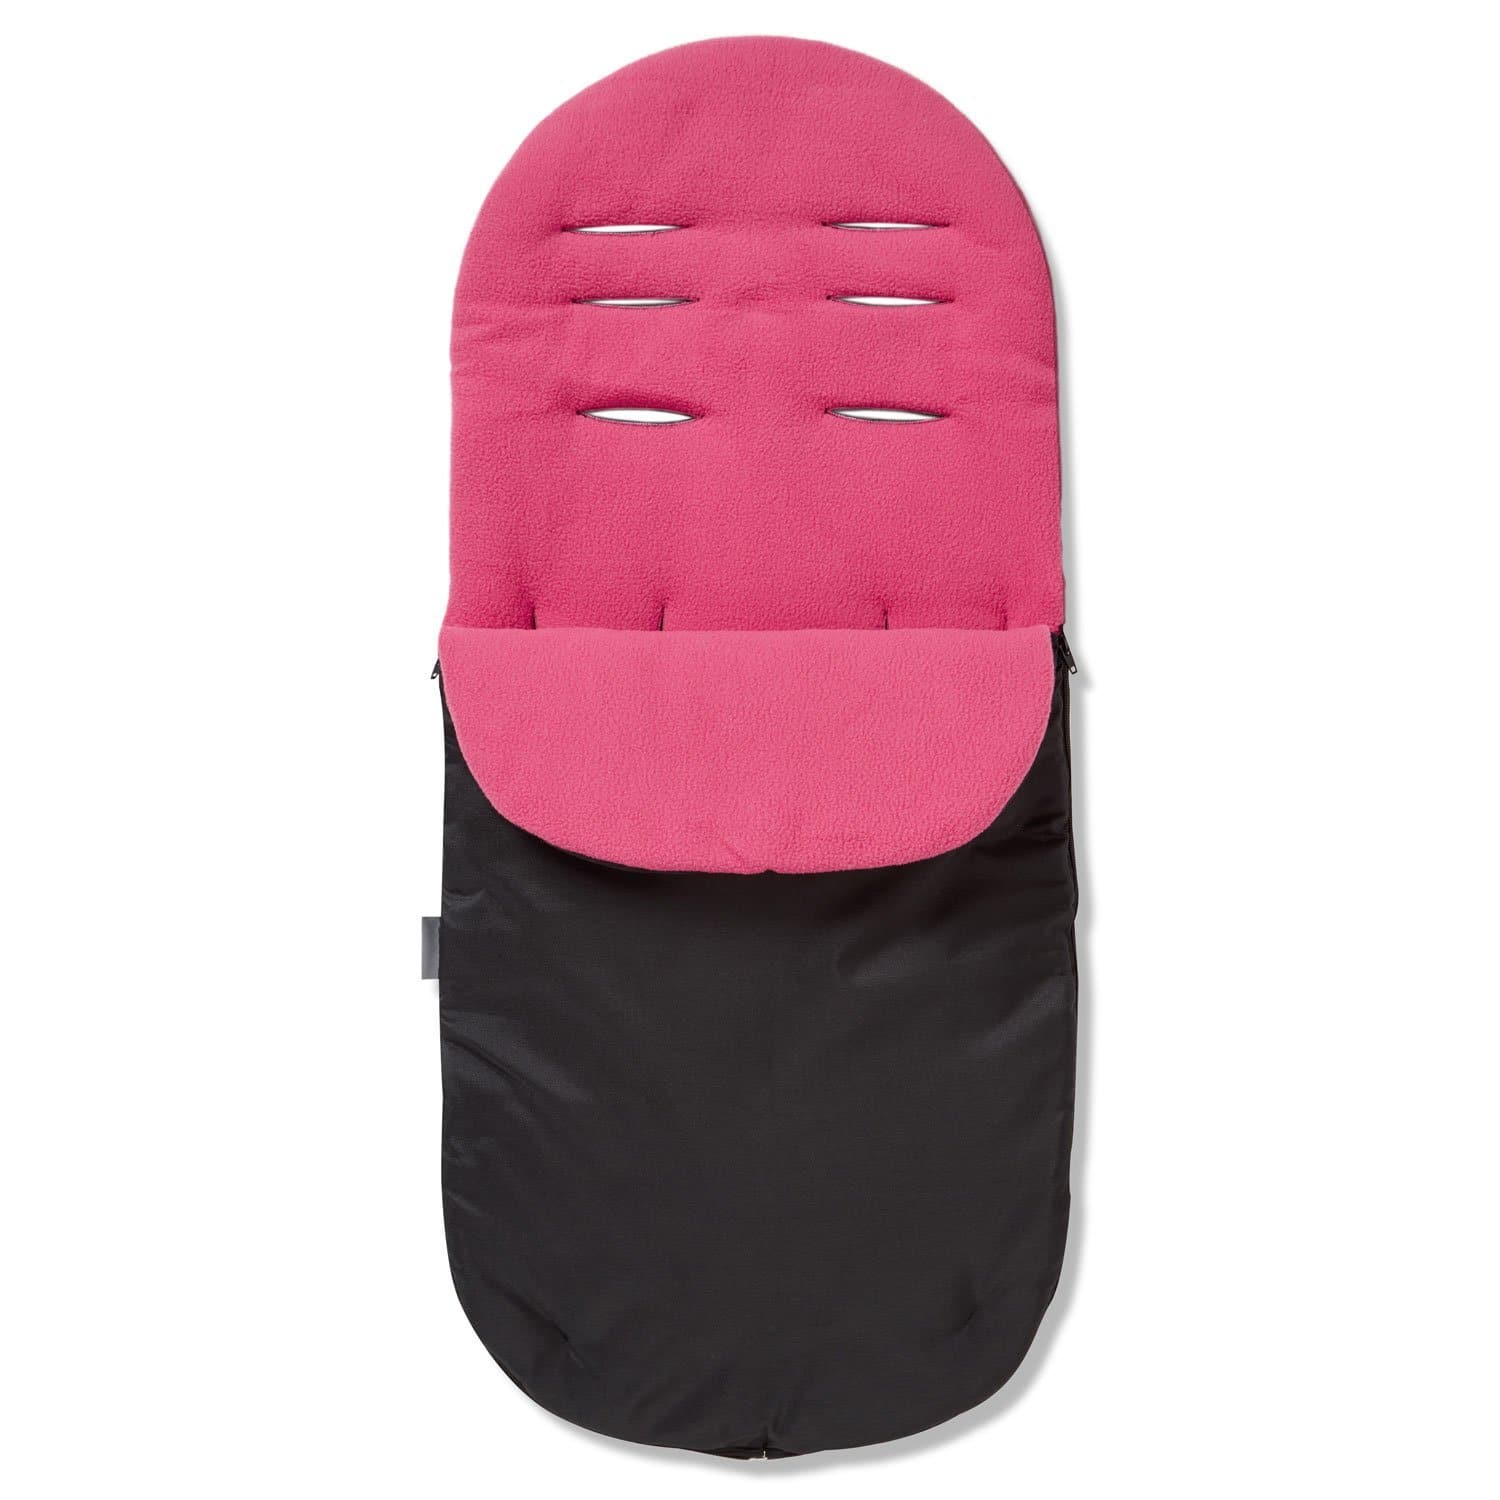 Footmuff / Cosy Toes Compatible with Babywelt - Dark Pink / Fits All Models | For Your Little One